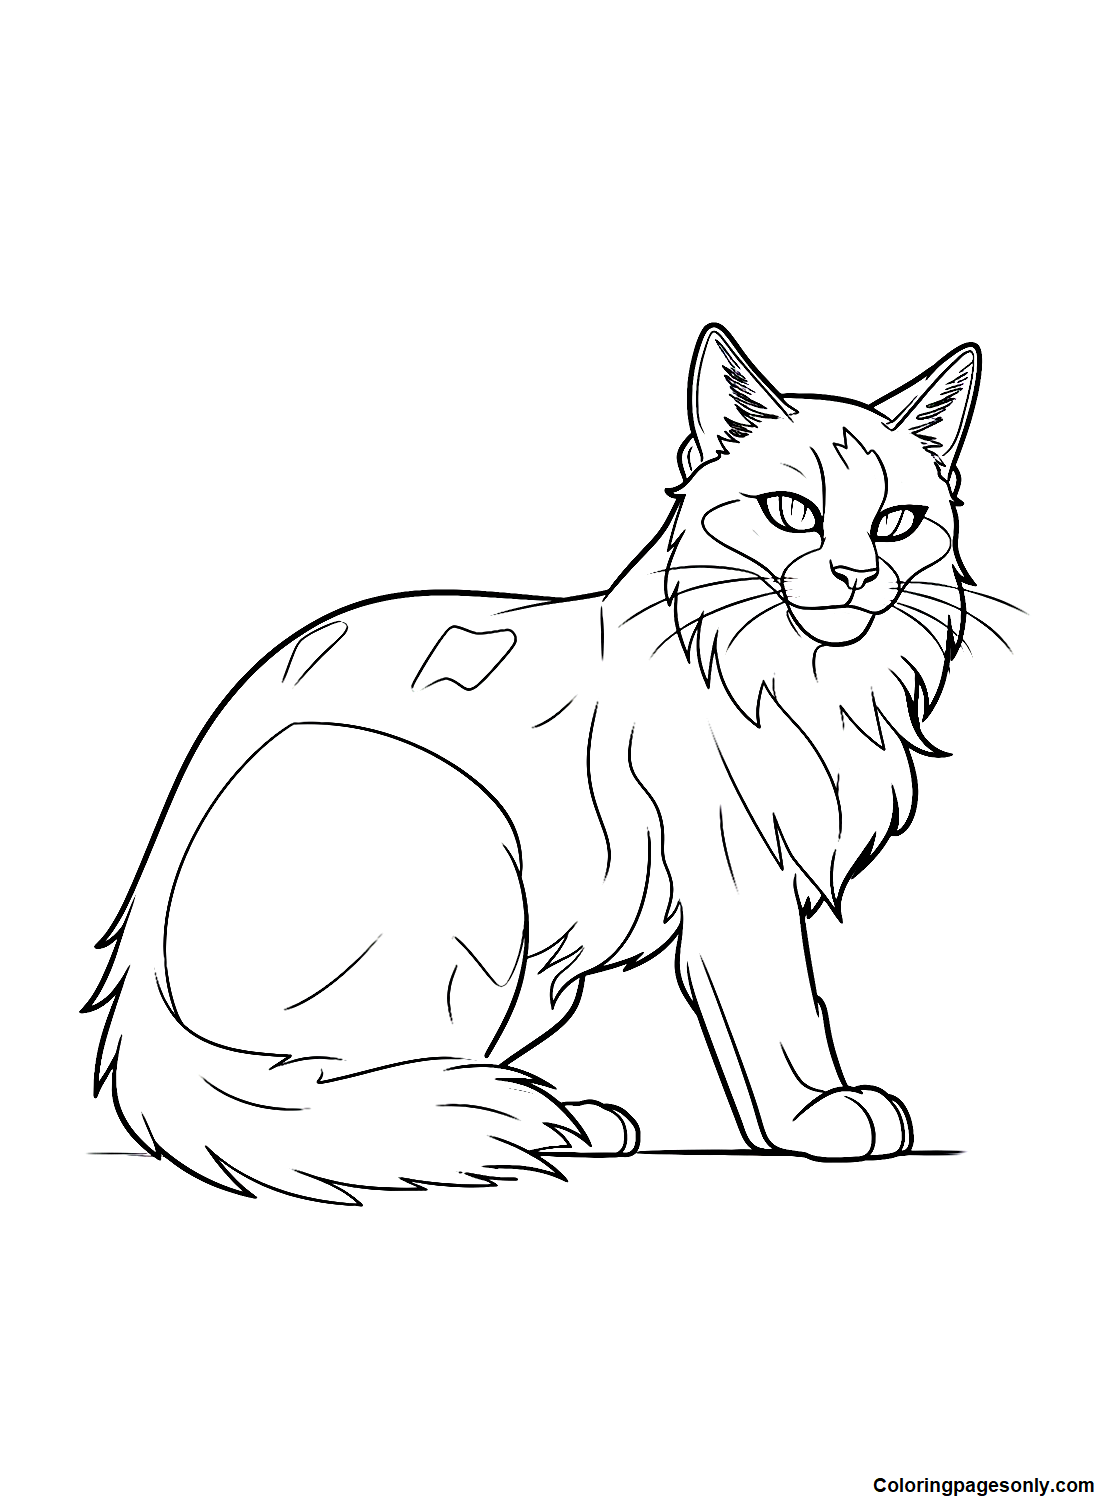 Warrior cats coloring pages printable for free download